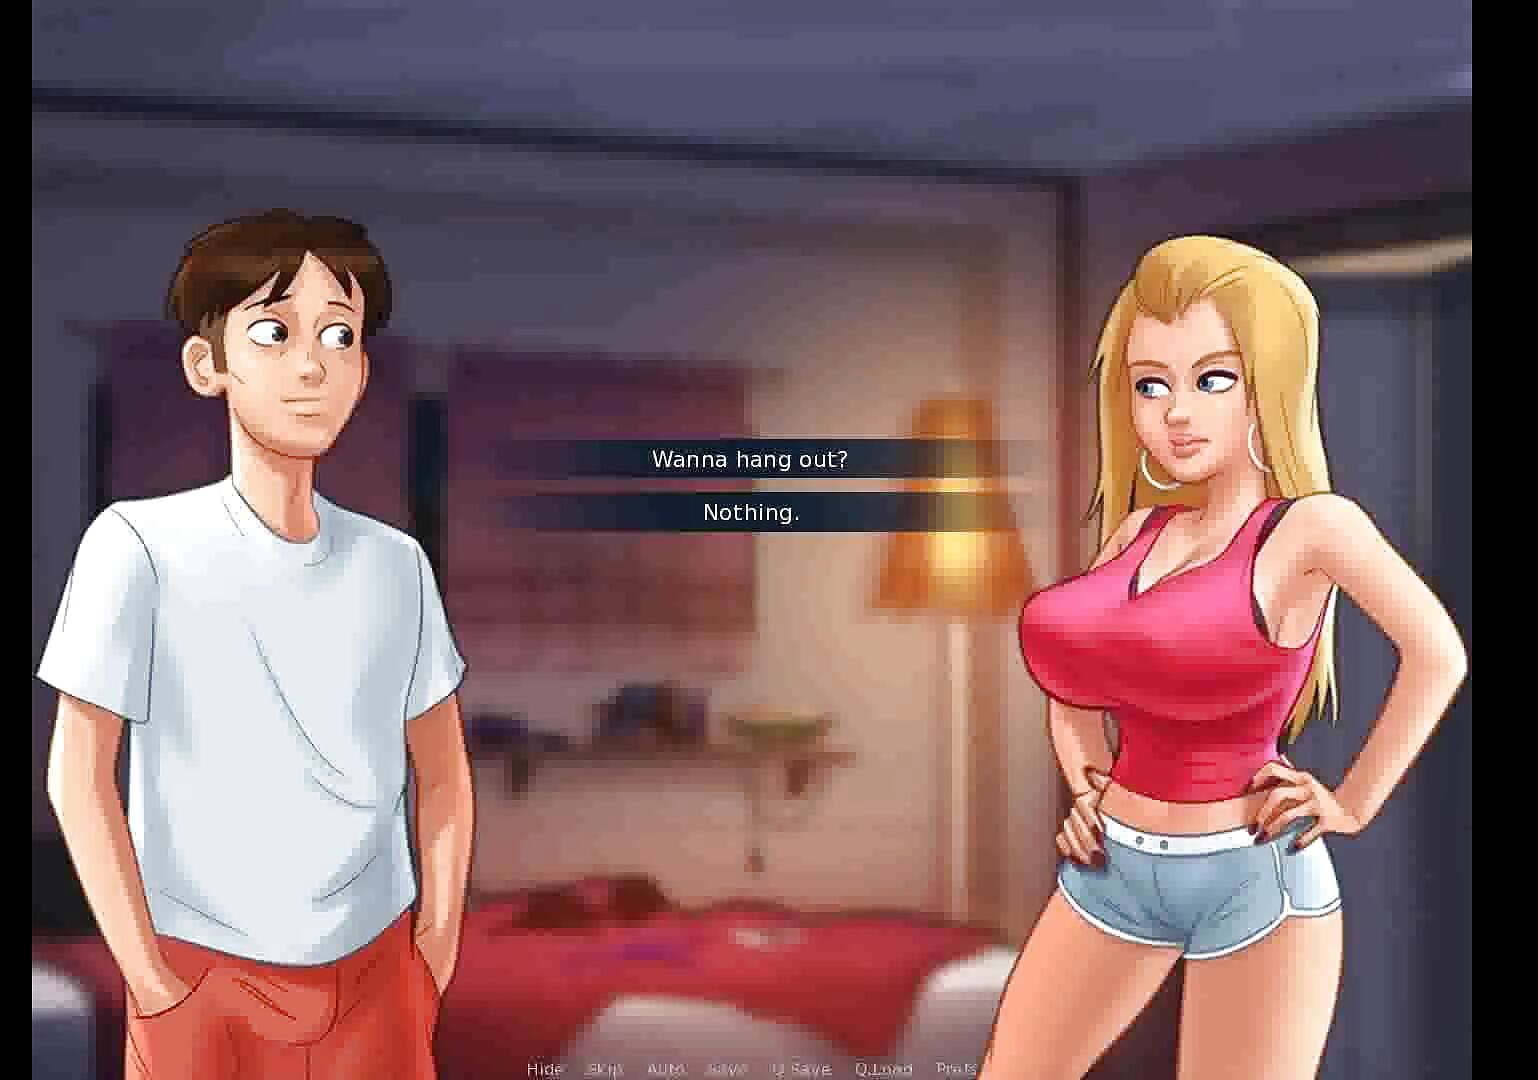 Summertime saga: college guy and his adventures ep 60-Dirty GamesxXx-Dirty GamesXxX